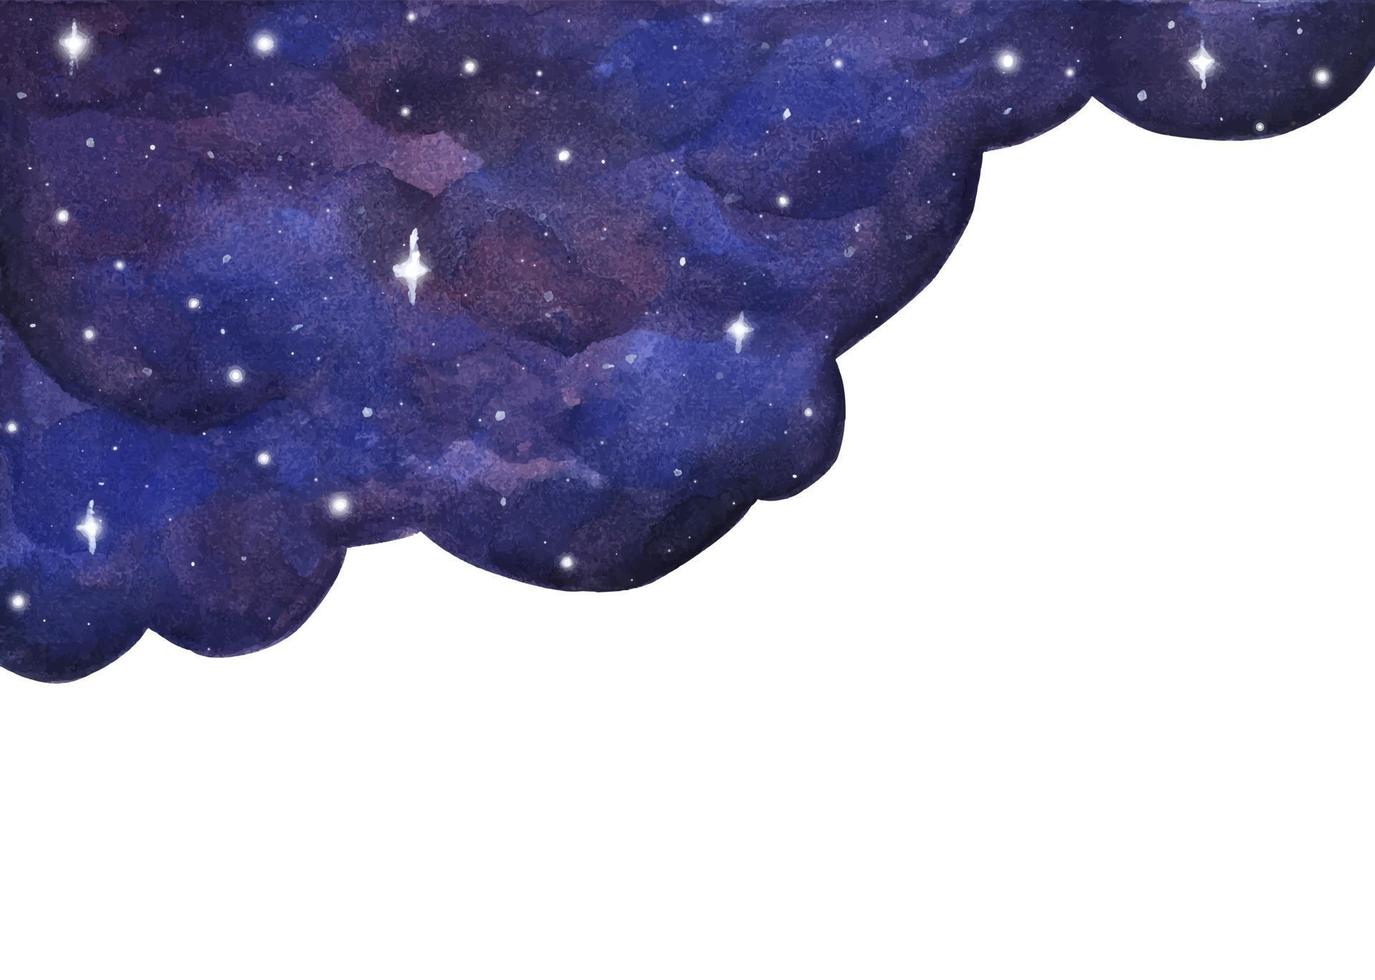 Watercolor night sky background with stars. vector